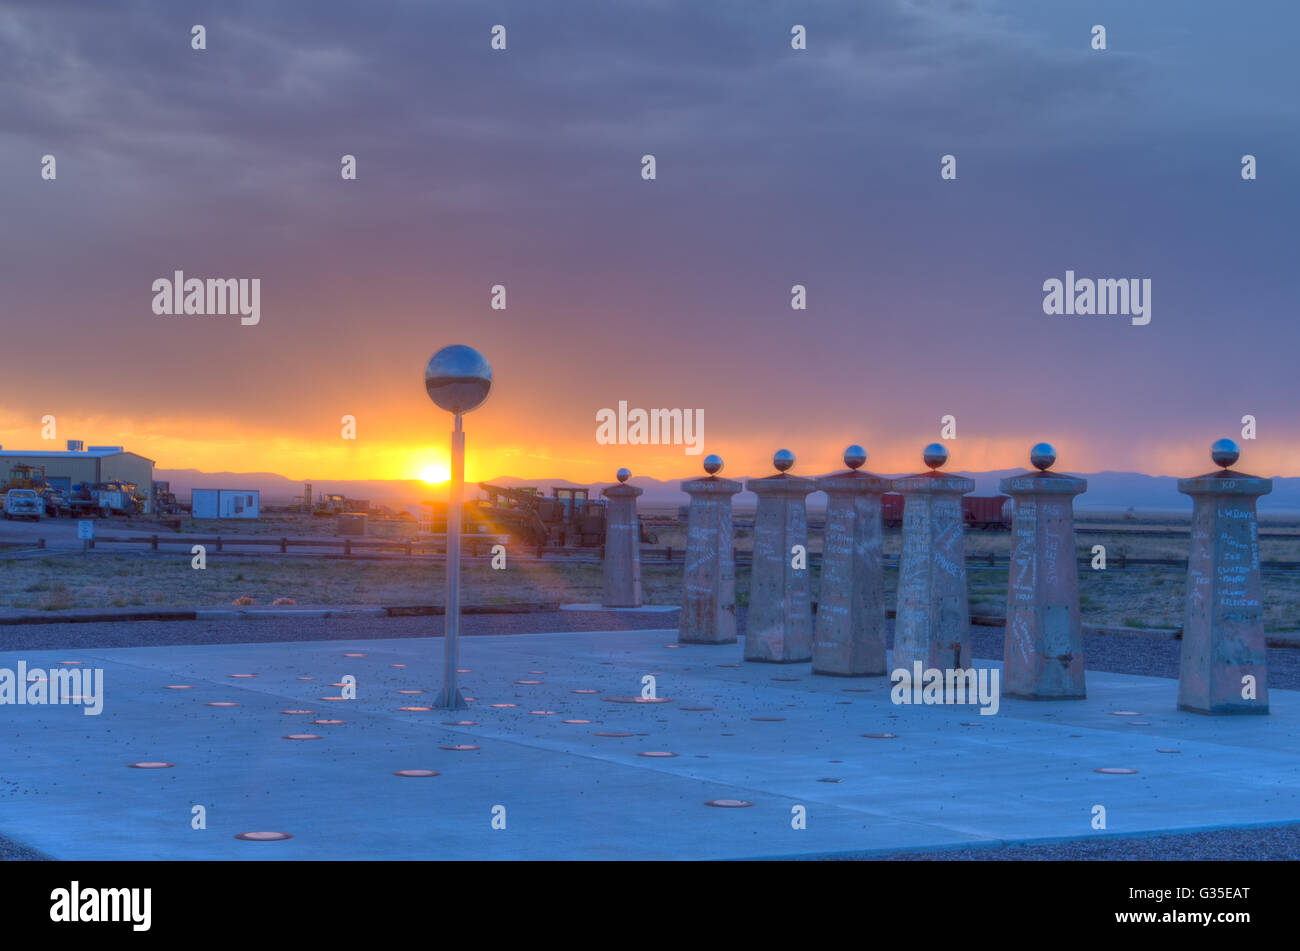 Sun Dial at the Very Large Array-National Radio Astronomy Observatory, New Mexico, USA. Stock Photo